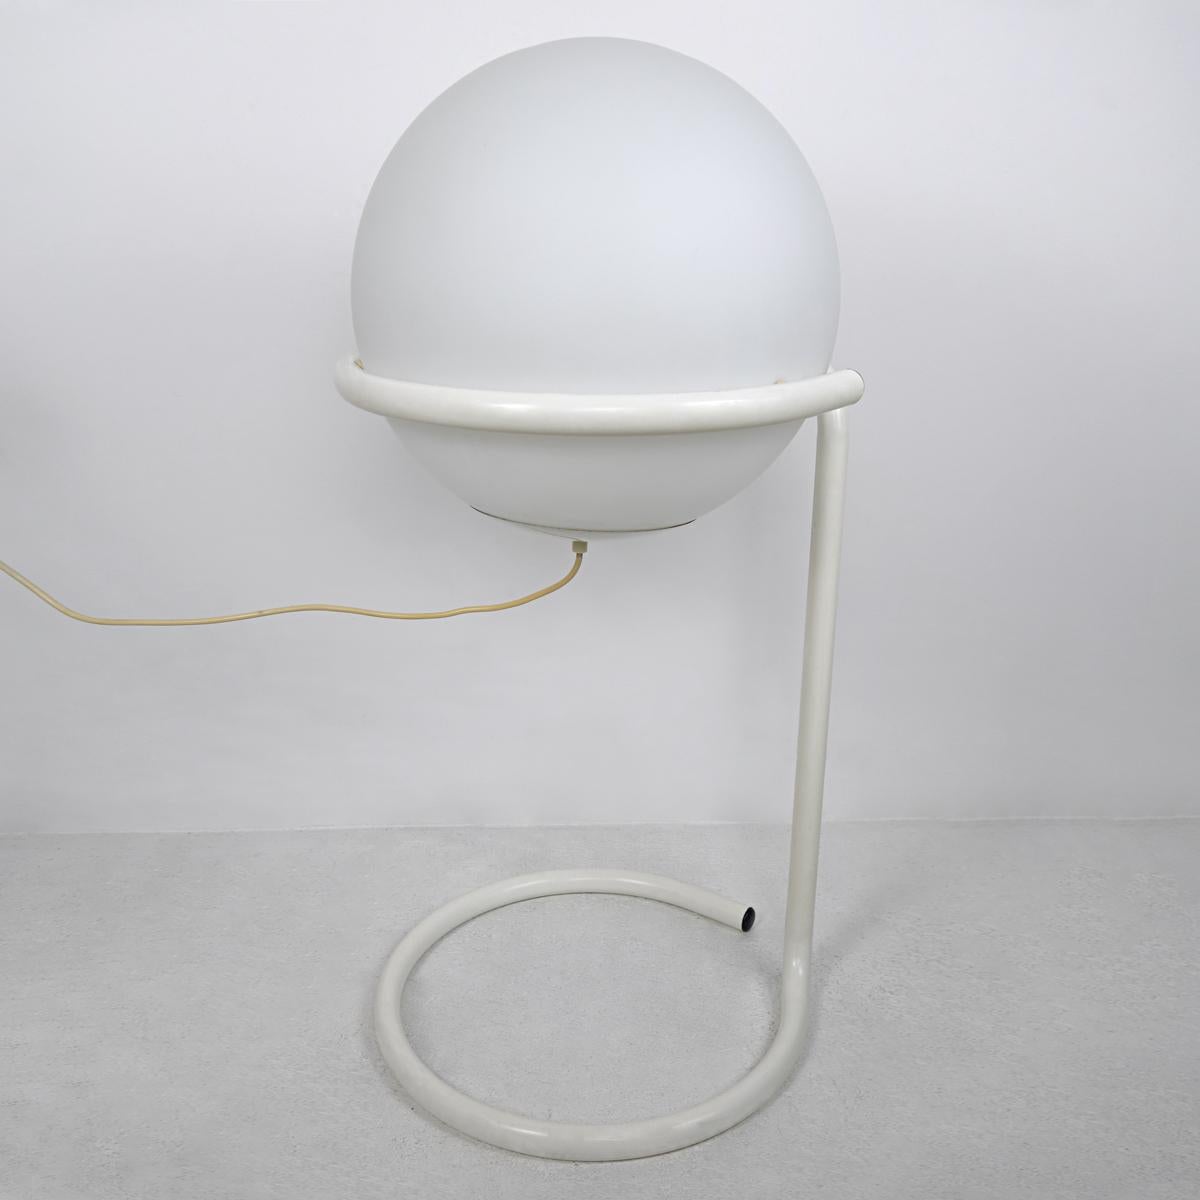 This original virgin-like white lamps seems to be coming straight from a James Bond set. The organically shaped white base is made in one piece and forms both on the ground as above in the air an ample circle. The lower one functions as a stable